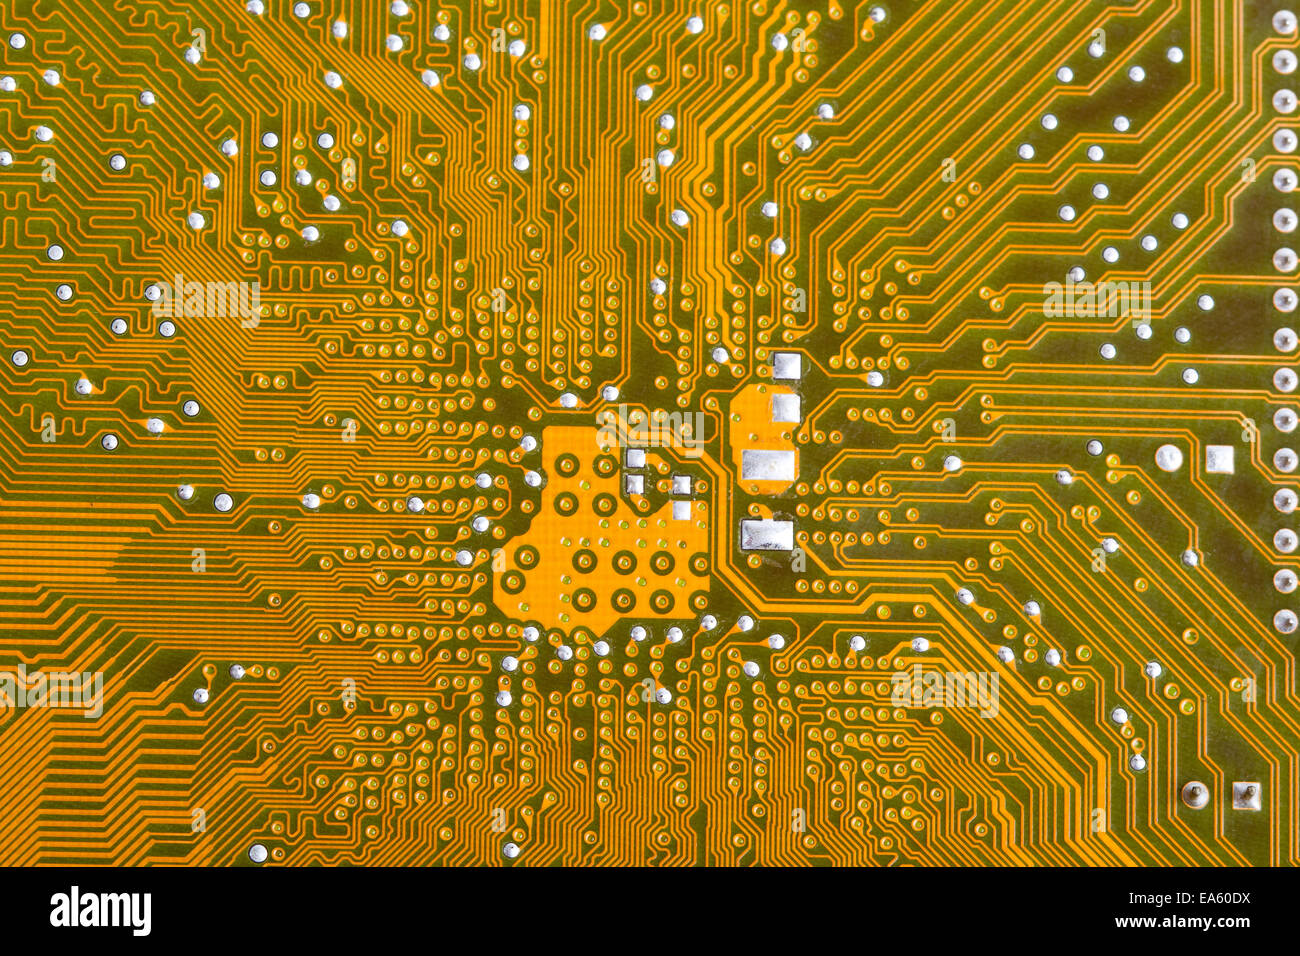 back part of the printed-circuit board Stock Photo